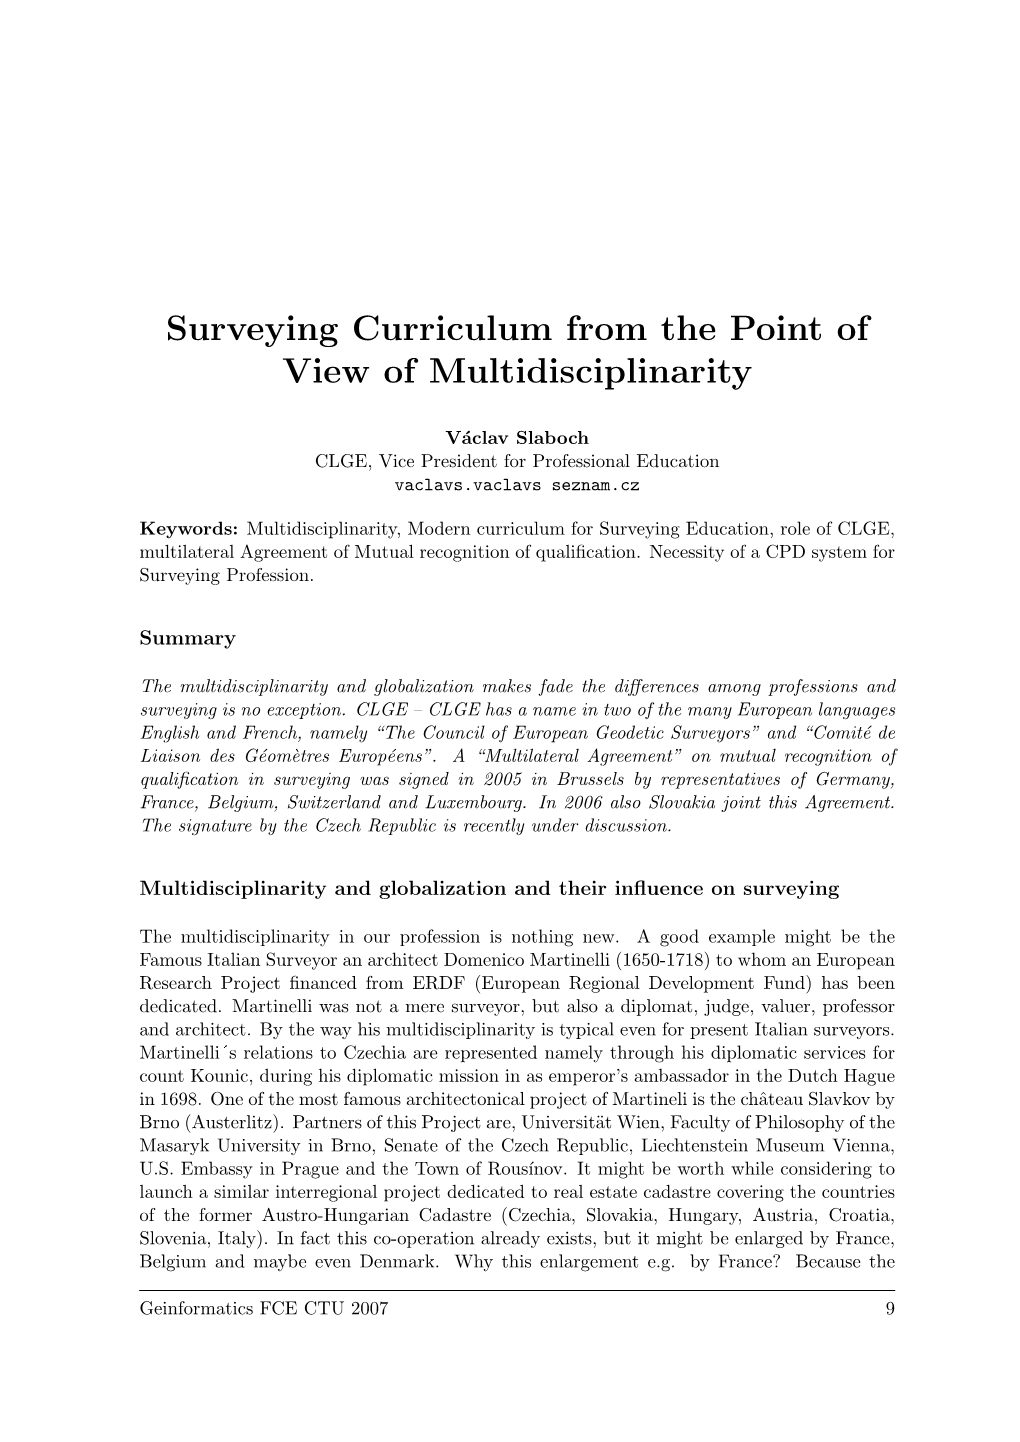 Surveying Curriculum from the Point of View of Multidisciplinarity